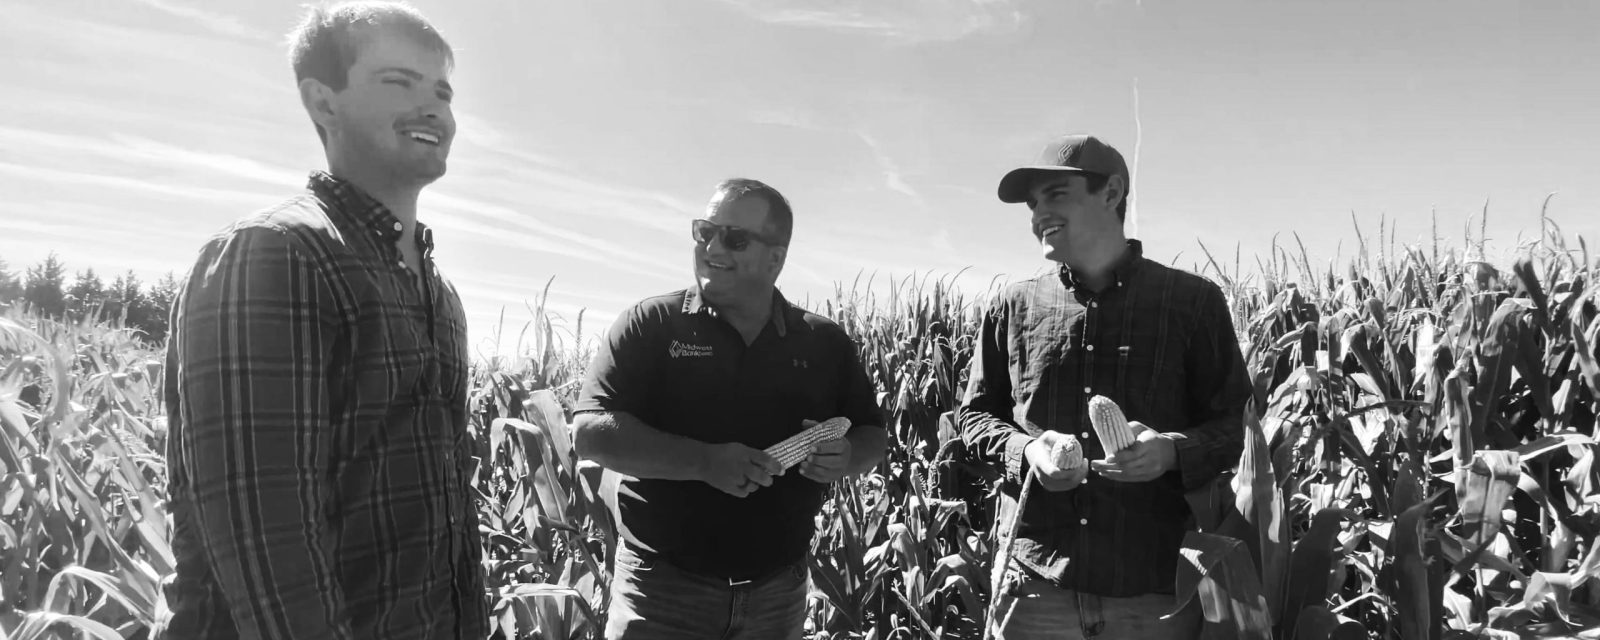 Josh Gossman, Crop Insurance Agent out of Pierce, talking in the field with some farmers.